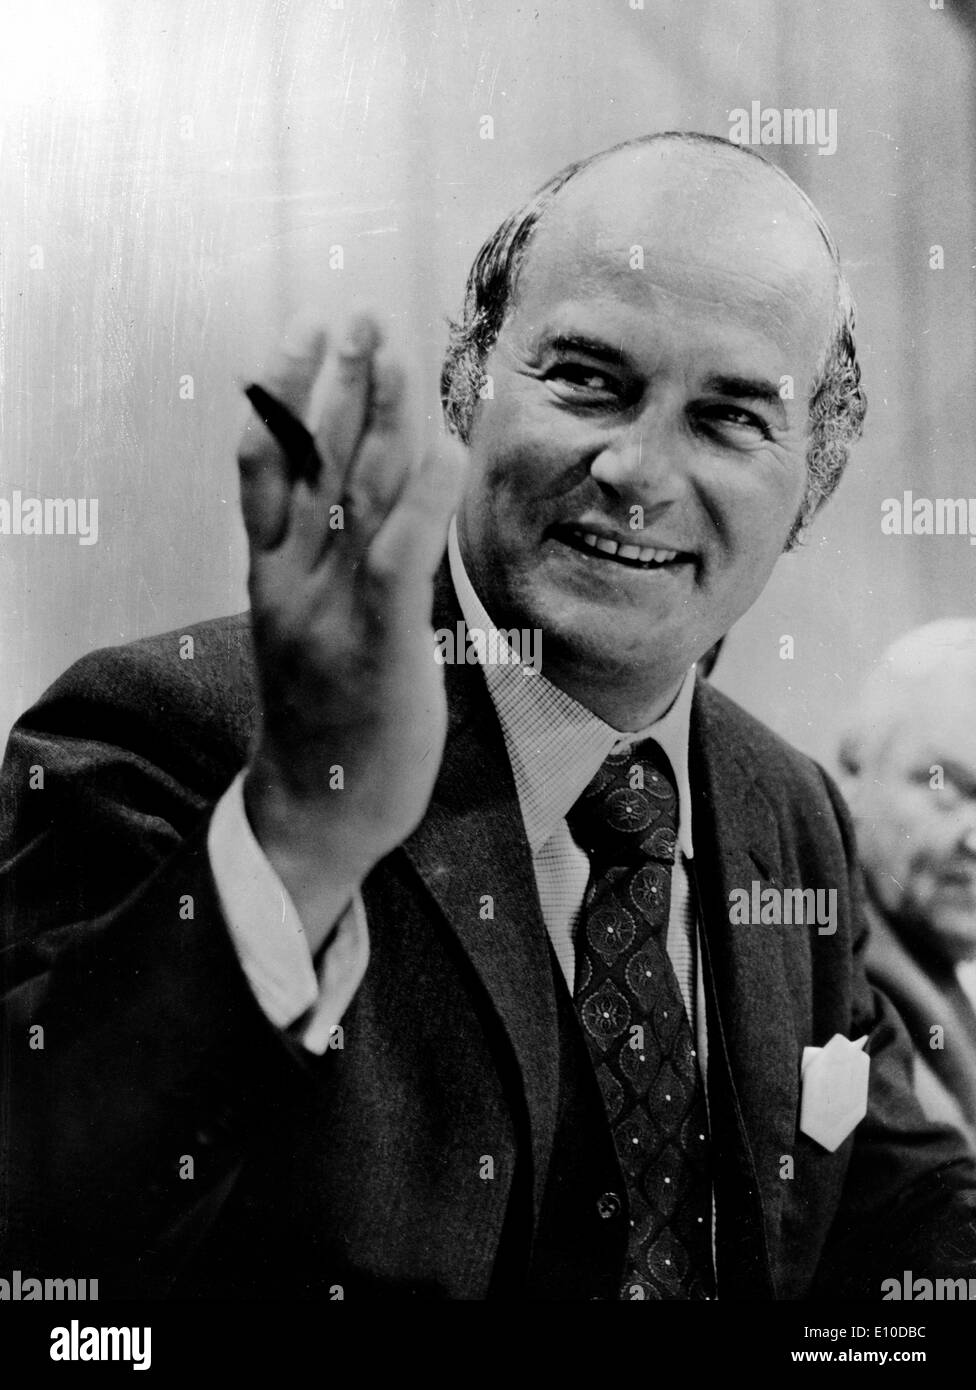 Apr 27, 1972; Bonn, Germany; Germans support Herr Brandt with wave of token strikes on the eve of today's crucial vote which will decide the fate of his Government. RAINER CANDIDUS BARZEL, chairman of the Christian Democratic Union hopes that the vote of no confidence in the Government will succeed. The picture shows Mr. Barzel looking very confident of success. Stock Photo